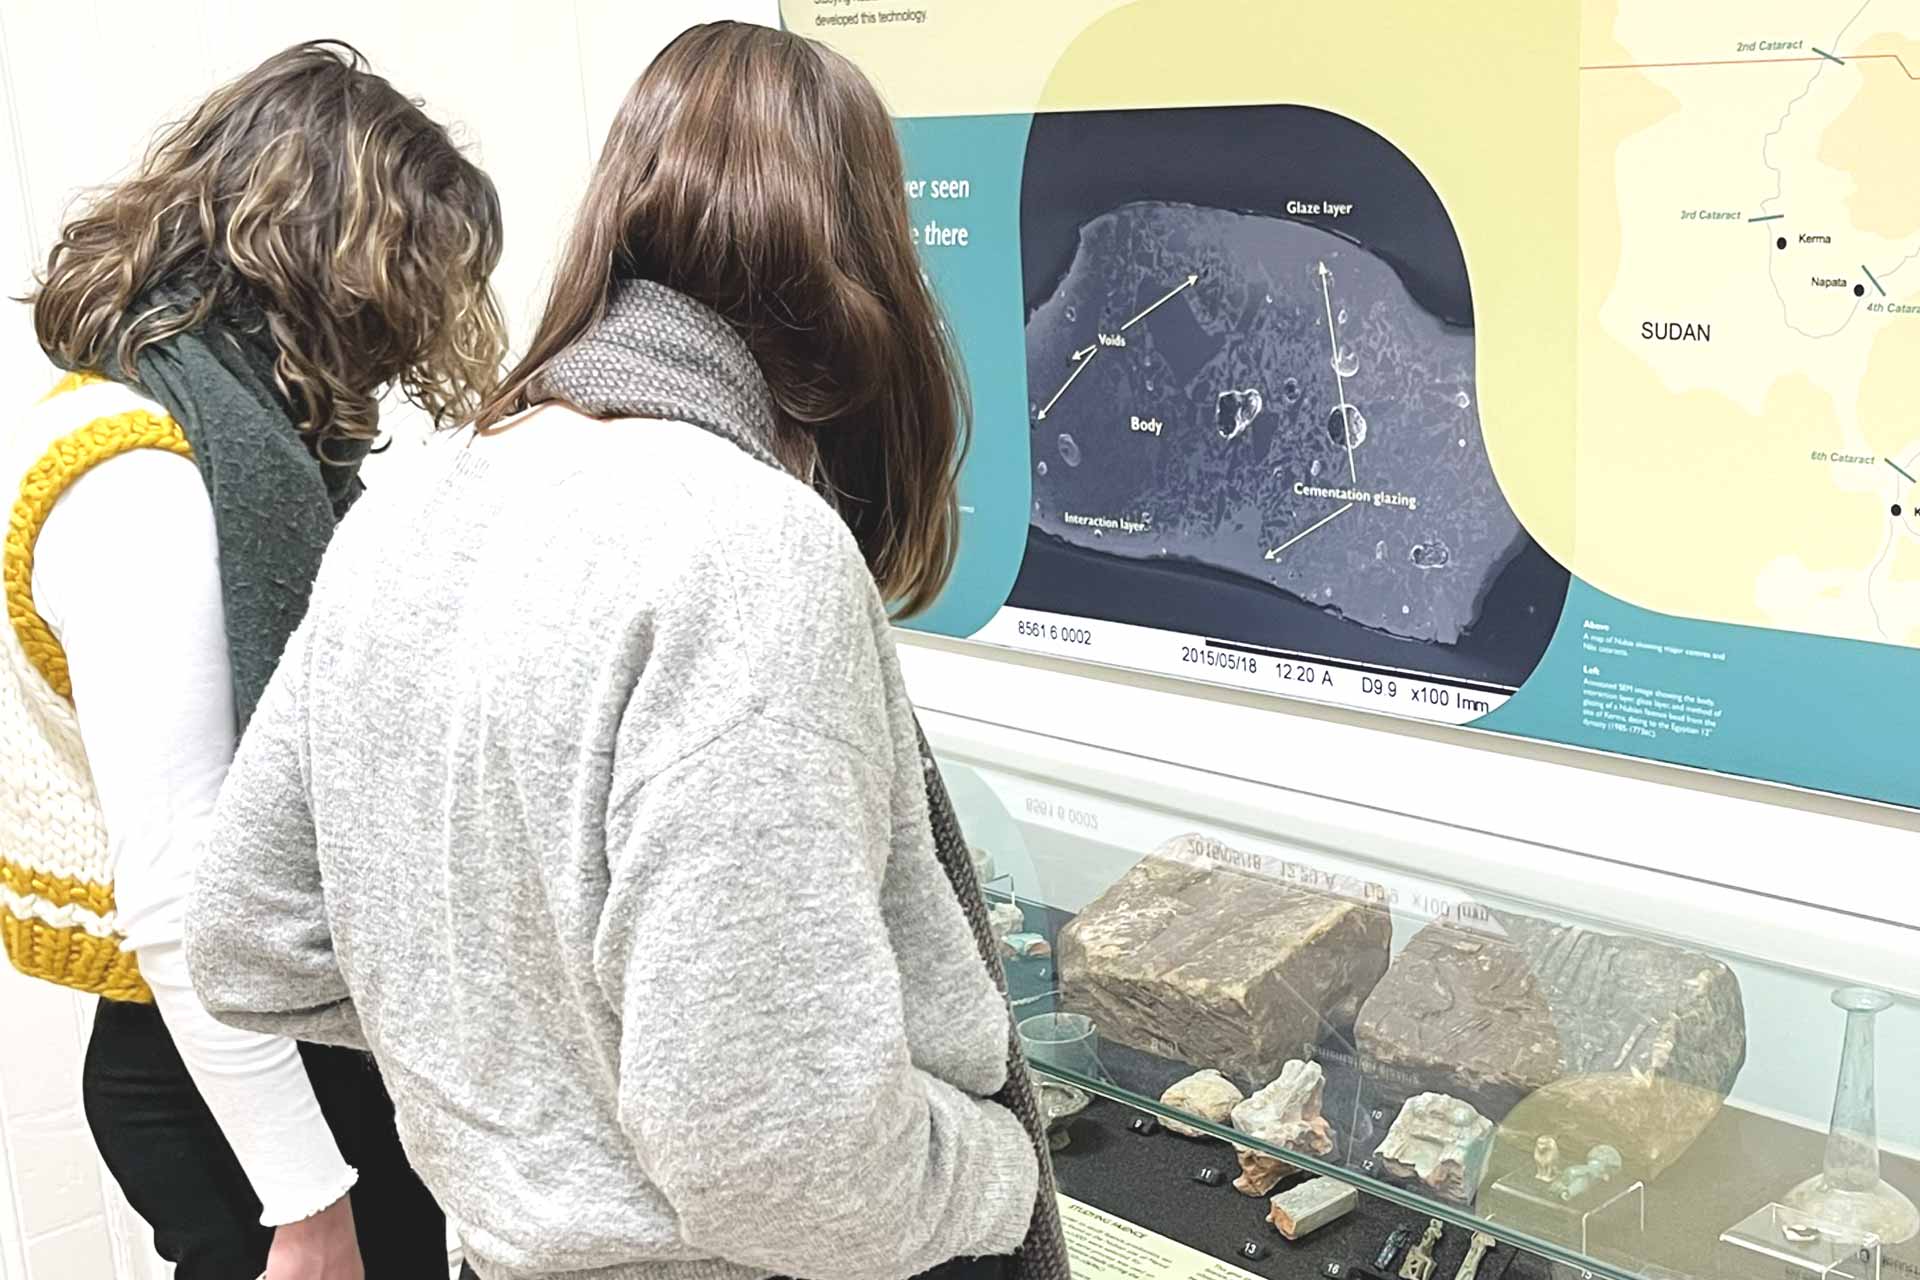 Two students looking at artefacts behind glass in the Garstang Museum